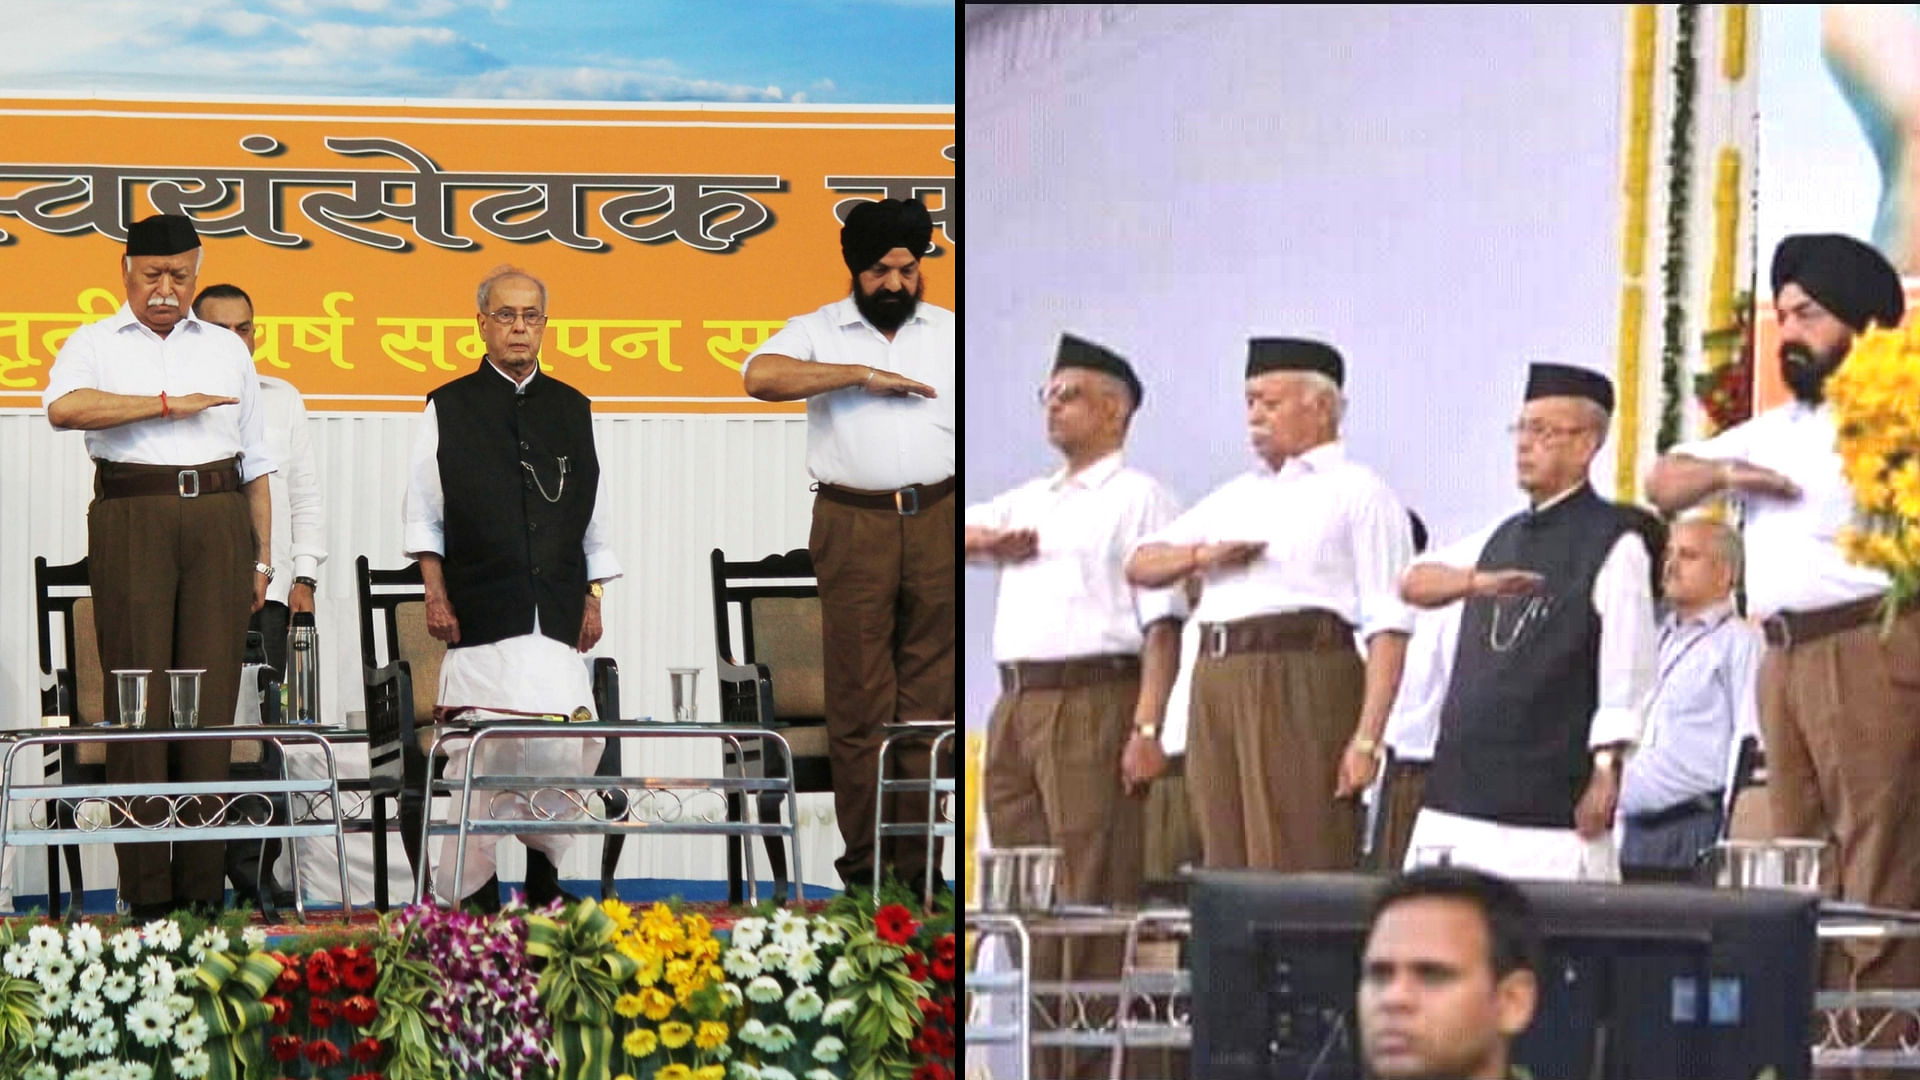 Twenty-four hours after Pranab Mukherjee visited the RSS headquarters in Nagpur for the organisation’s Tritya Varsha Varg event, a morphed photo of Mukherjee has sent the internet in a dizzy.